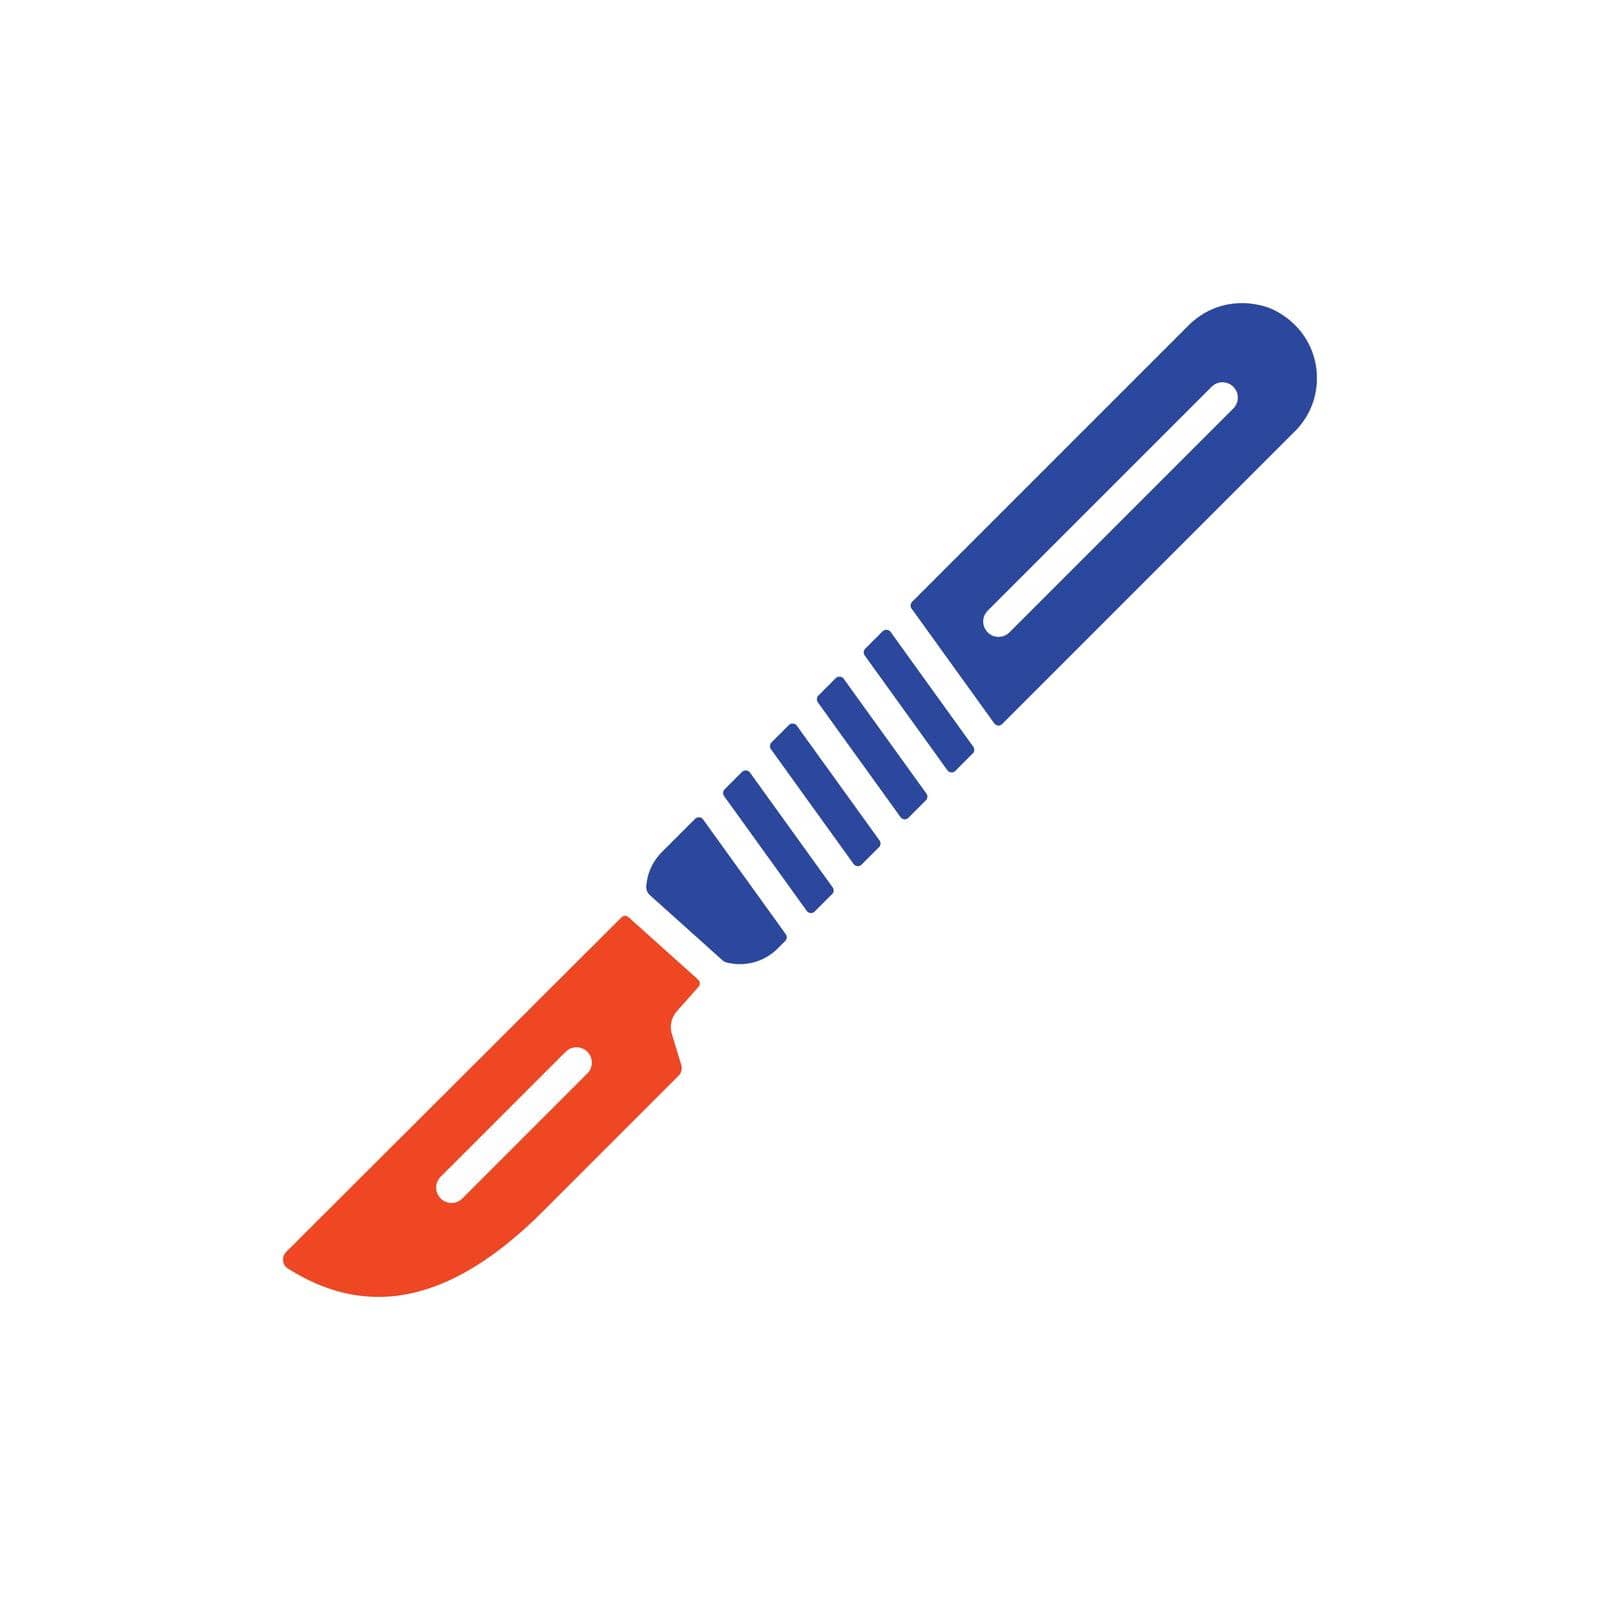 Surgical tools for operations scalpel glyph icon by nosik